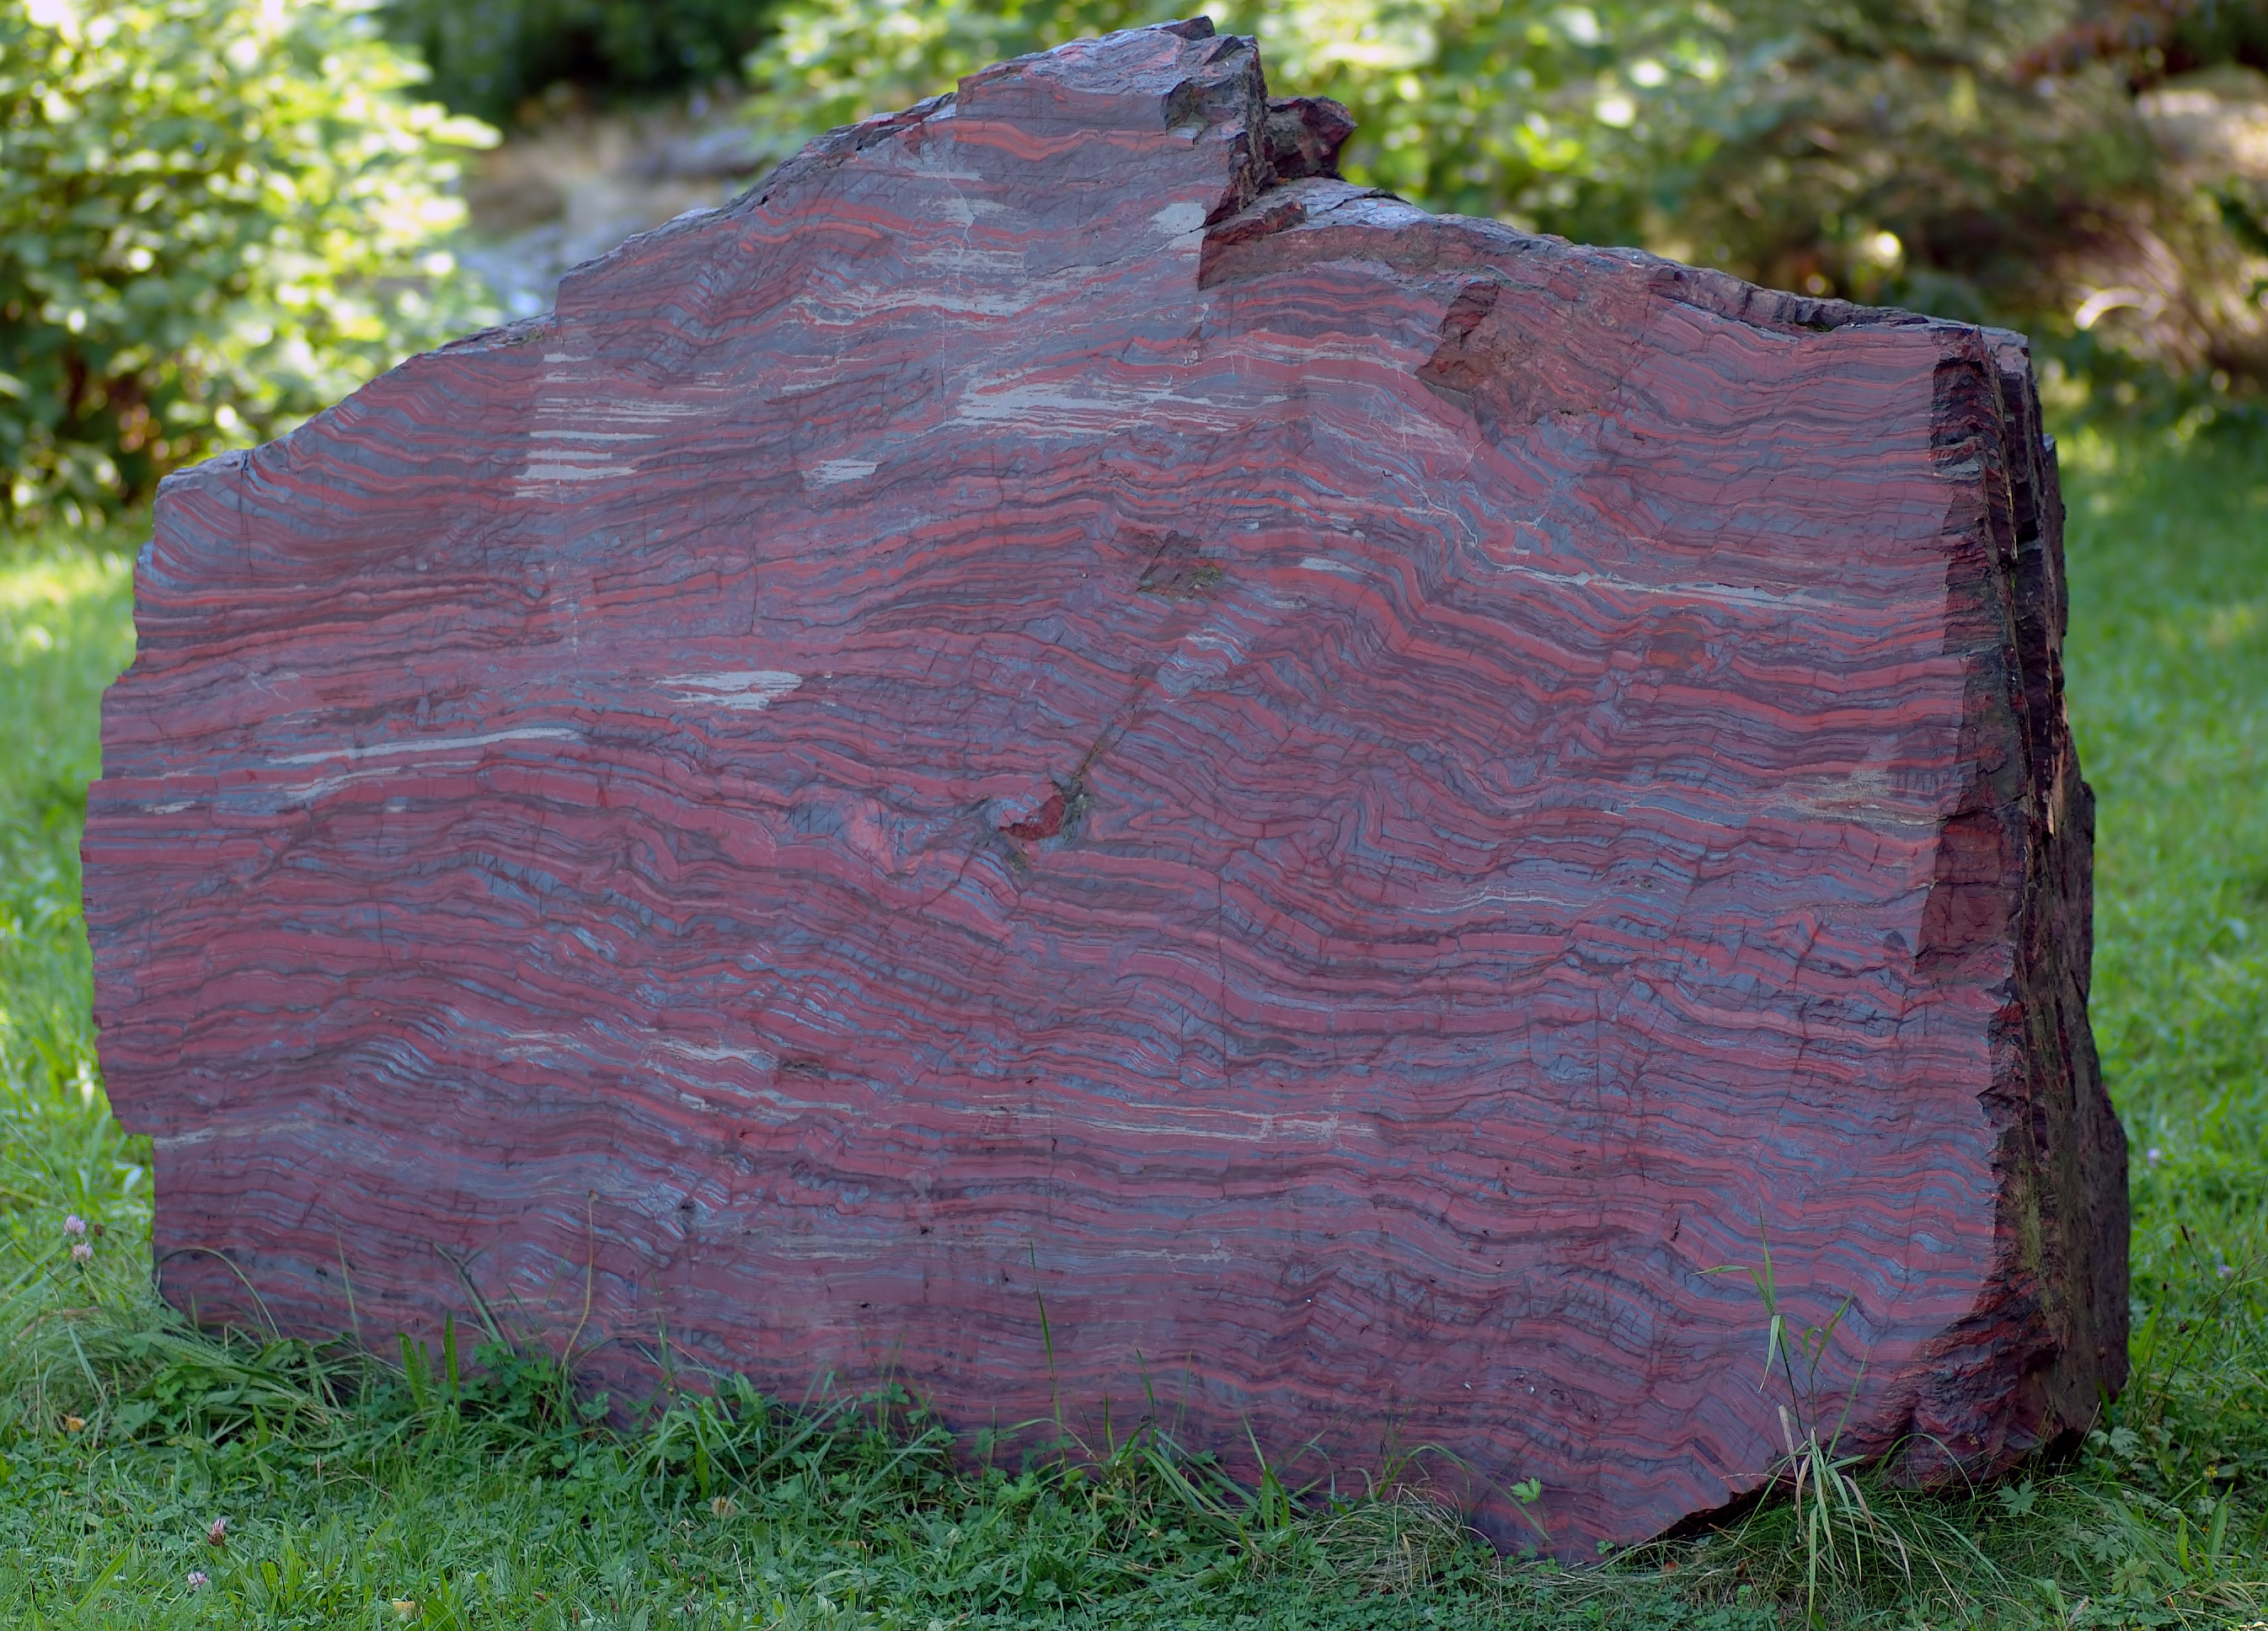 Banded iron formation from an unknown location in North America on display at a museum in Germany. The rock is about 2 m across. The dark grey layers are magnetite and the red layers are hematite. Chert is also present. Source: https://upload.wikimedia.org/wikipedia/commons/5/5f/Black-band_ironstone_%28aka%29.jpg